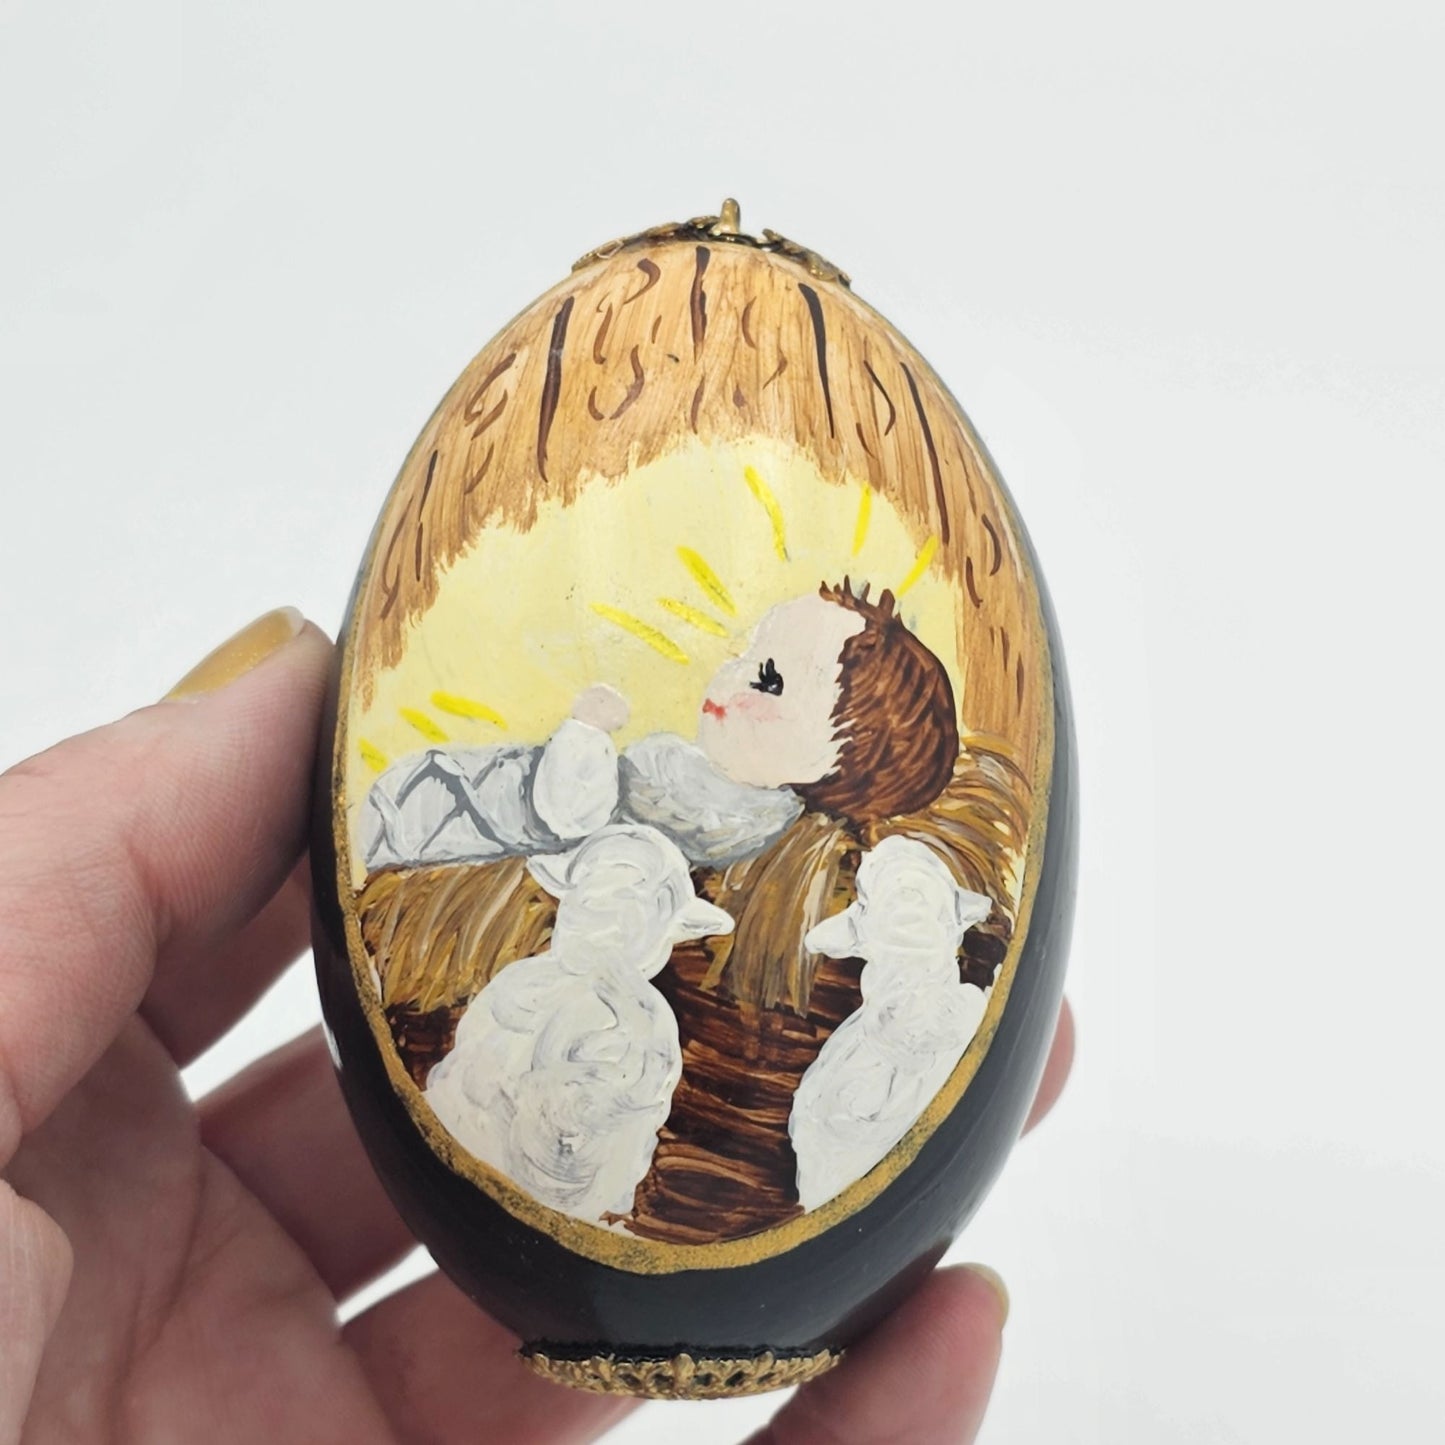 Handpainted Wood Egg Baby Jesus Easter Ornament Green Yellow